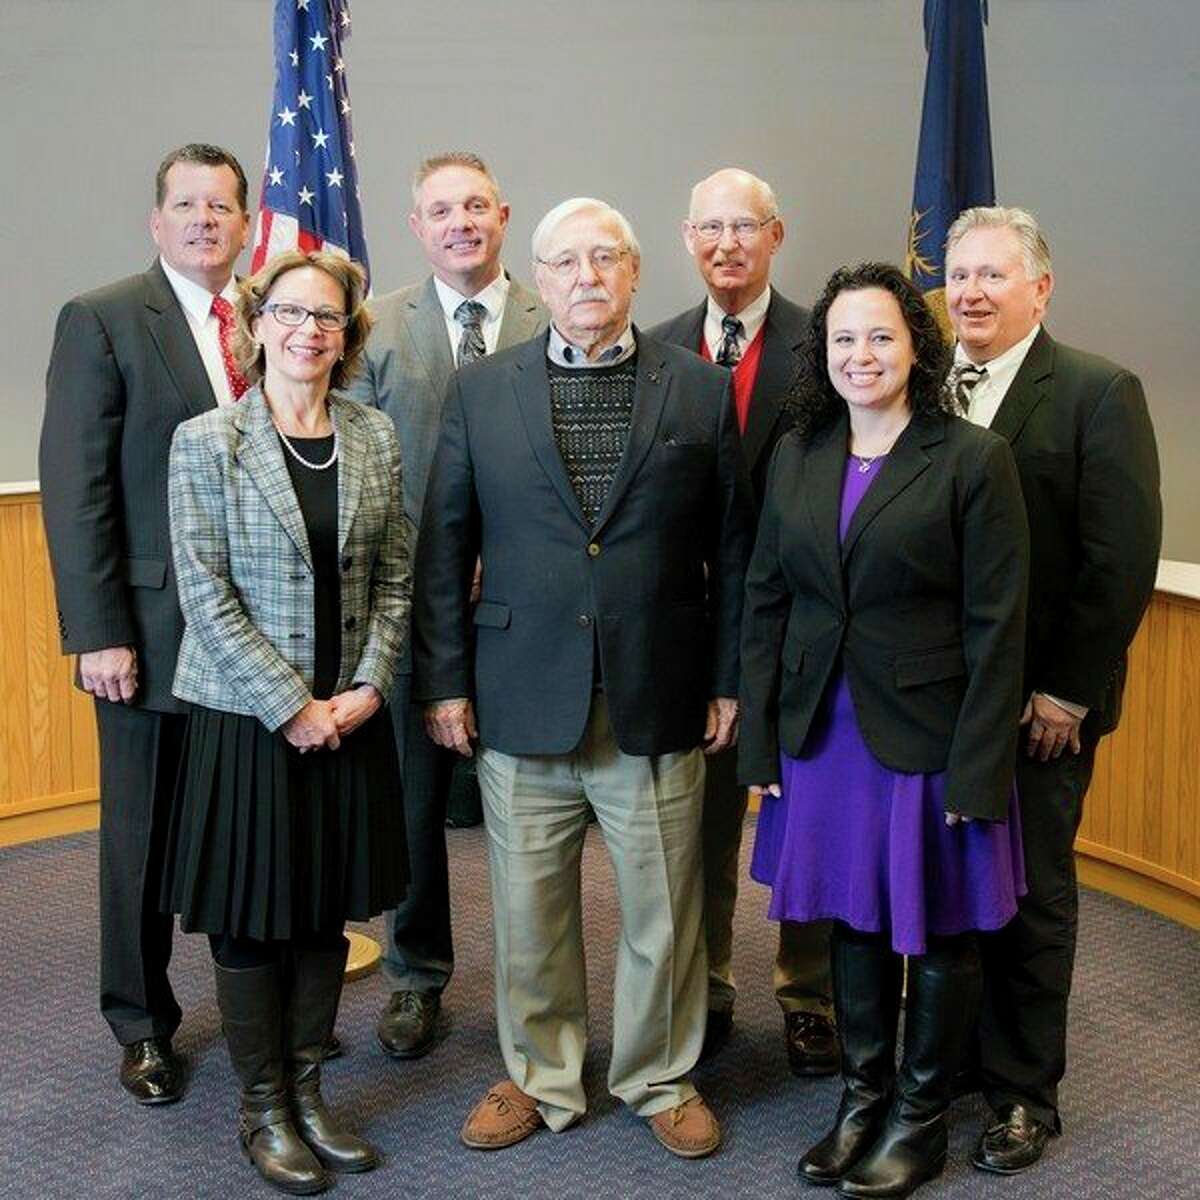 Photo provided Midland County Board of Commissioners (front row left to right): Gaye Terwillegar, R-District 4; Vice Chair James Geisler, R-District 5; and Jeanette Snyder, R-District 1; (back row left to right) Eric Dorrien, R-District 6; Chair Mark Bone, R-District 2; Steve Glaser, R-District 3; and Scott Noesen, R-District 7.